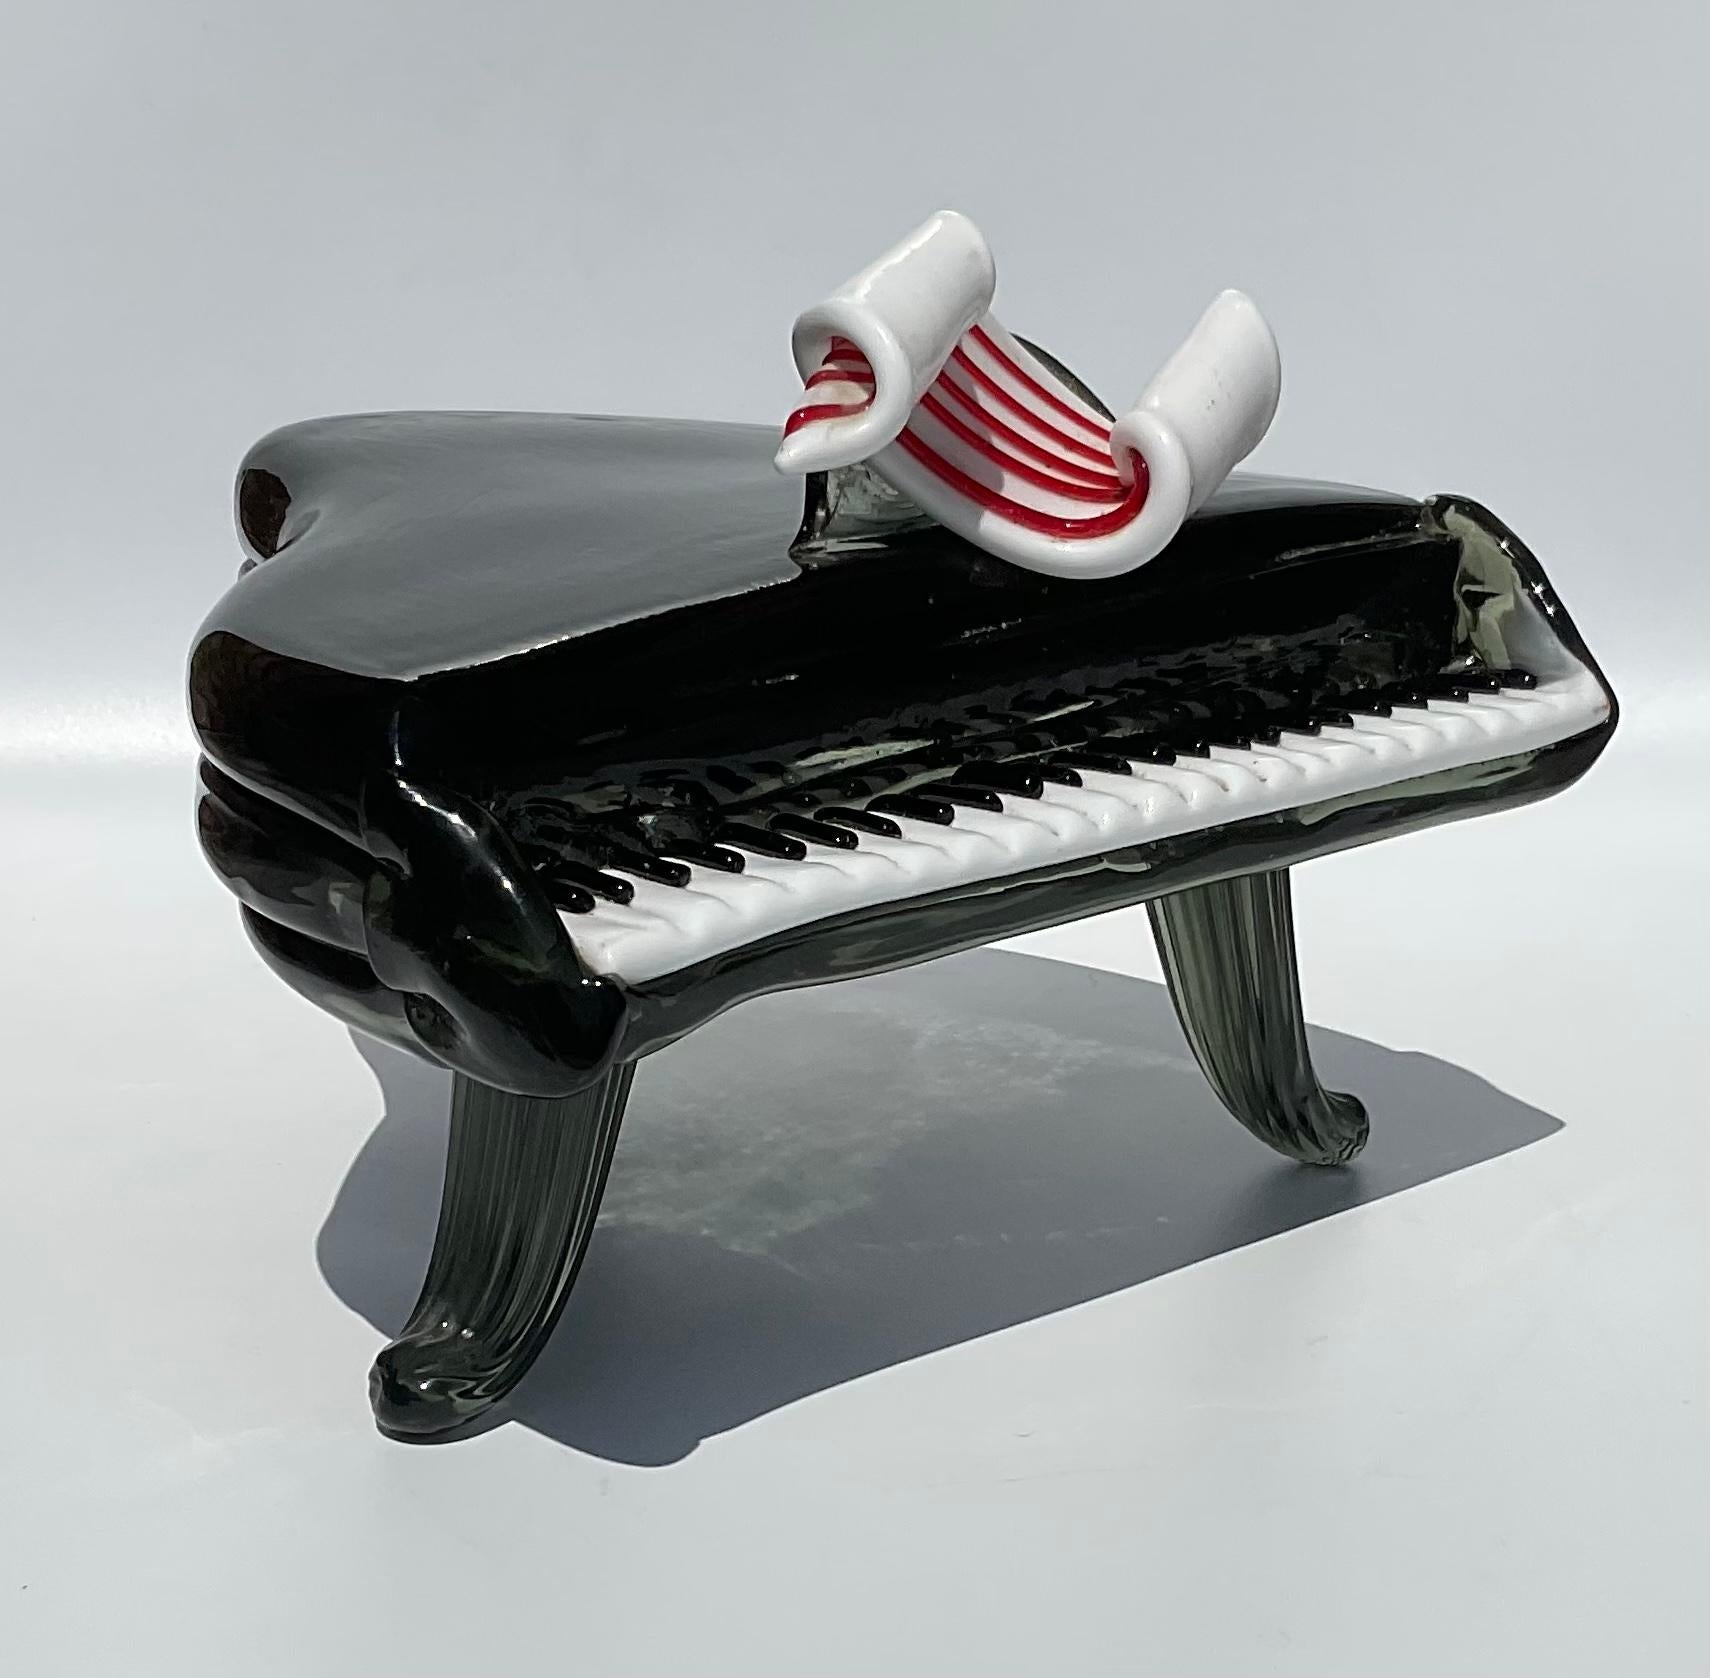 Grand Piano Sculpture in Murano Art Glass attributed to Ercole Barovier design Circa 1950’s. Amazing piano sculpture with sculpted legs, pasta glass keys, and a red and white applied ribbon. Amazing sculptural piece of glass.